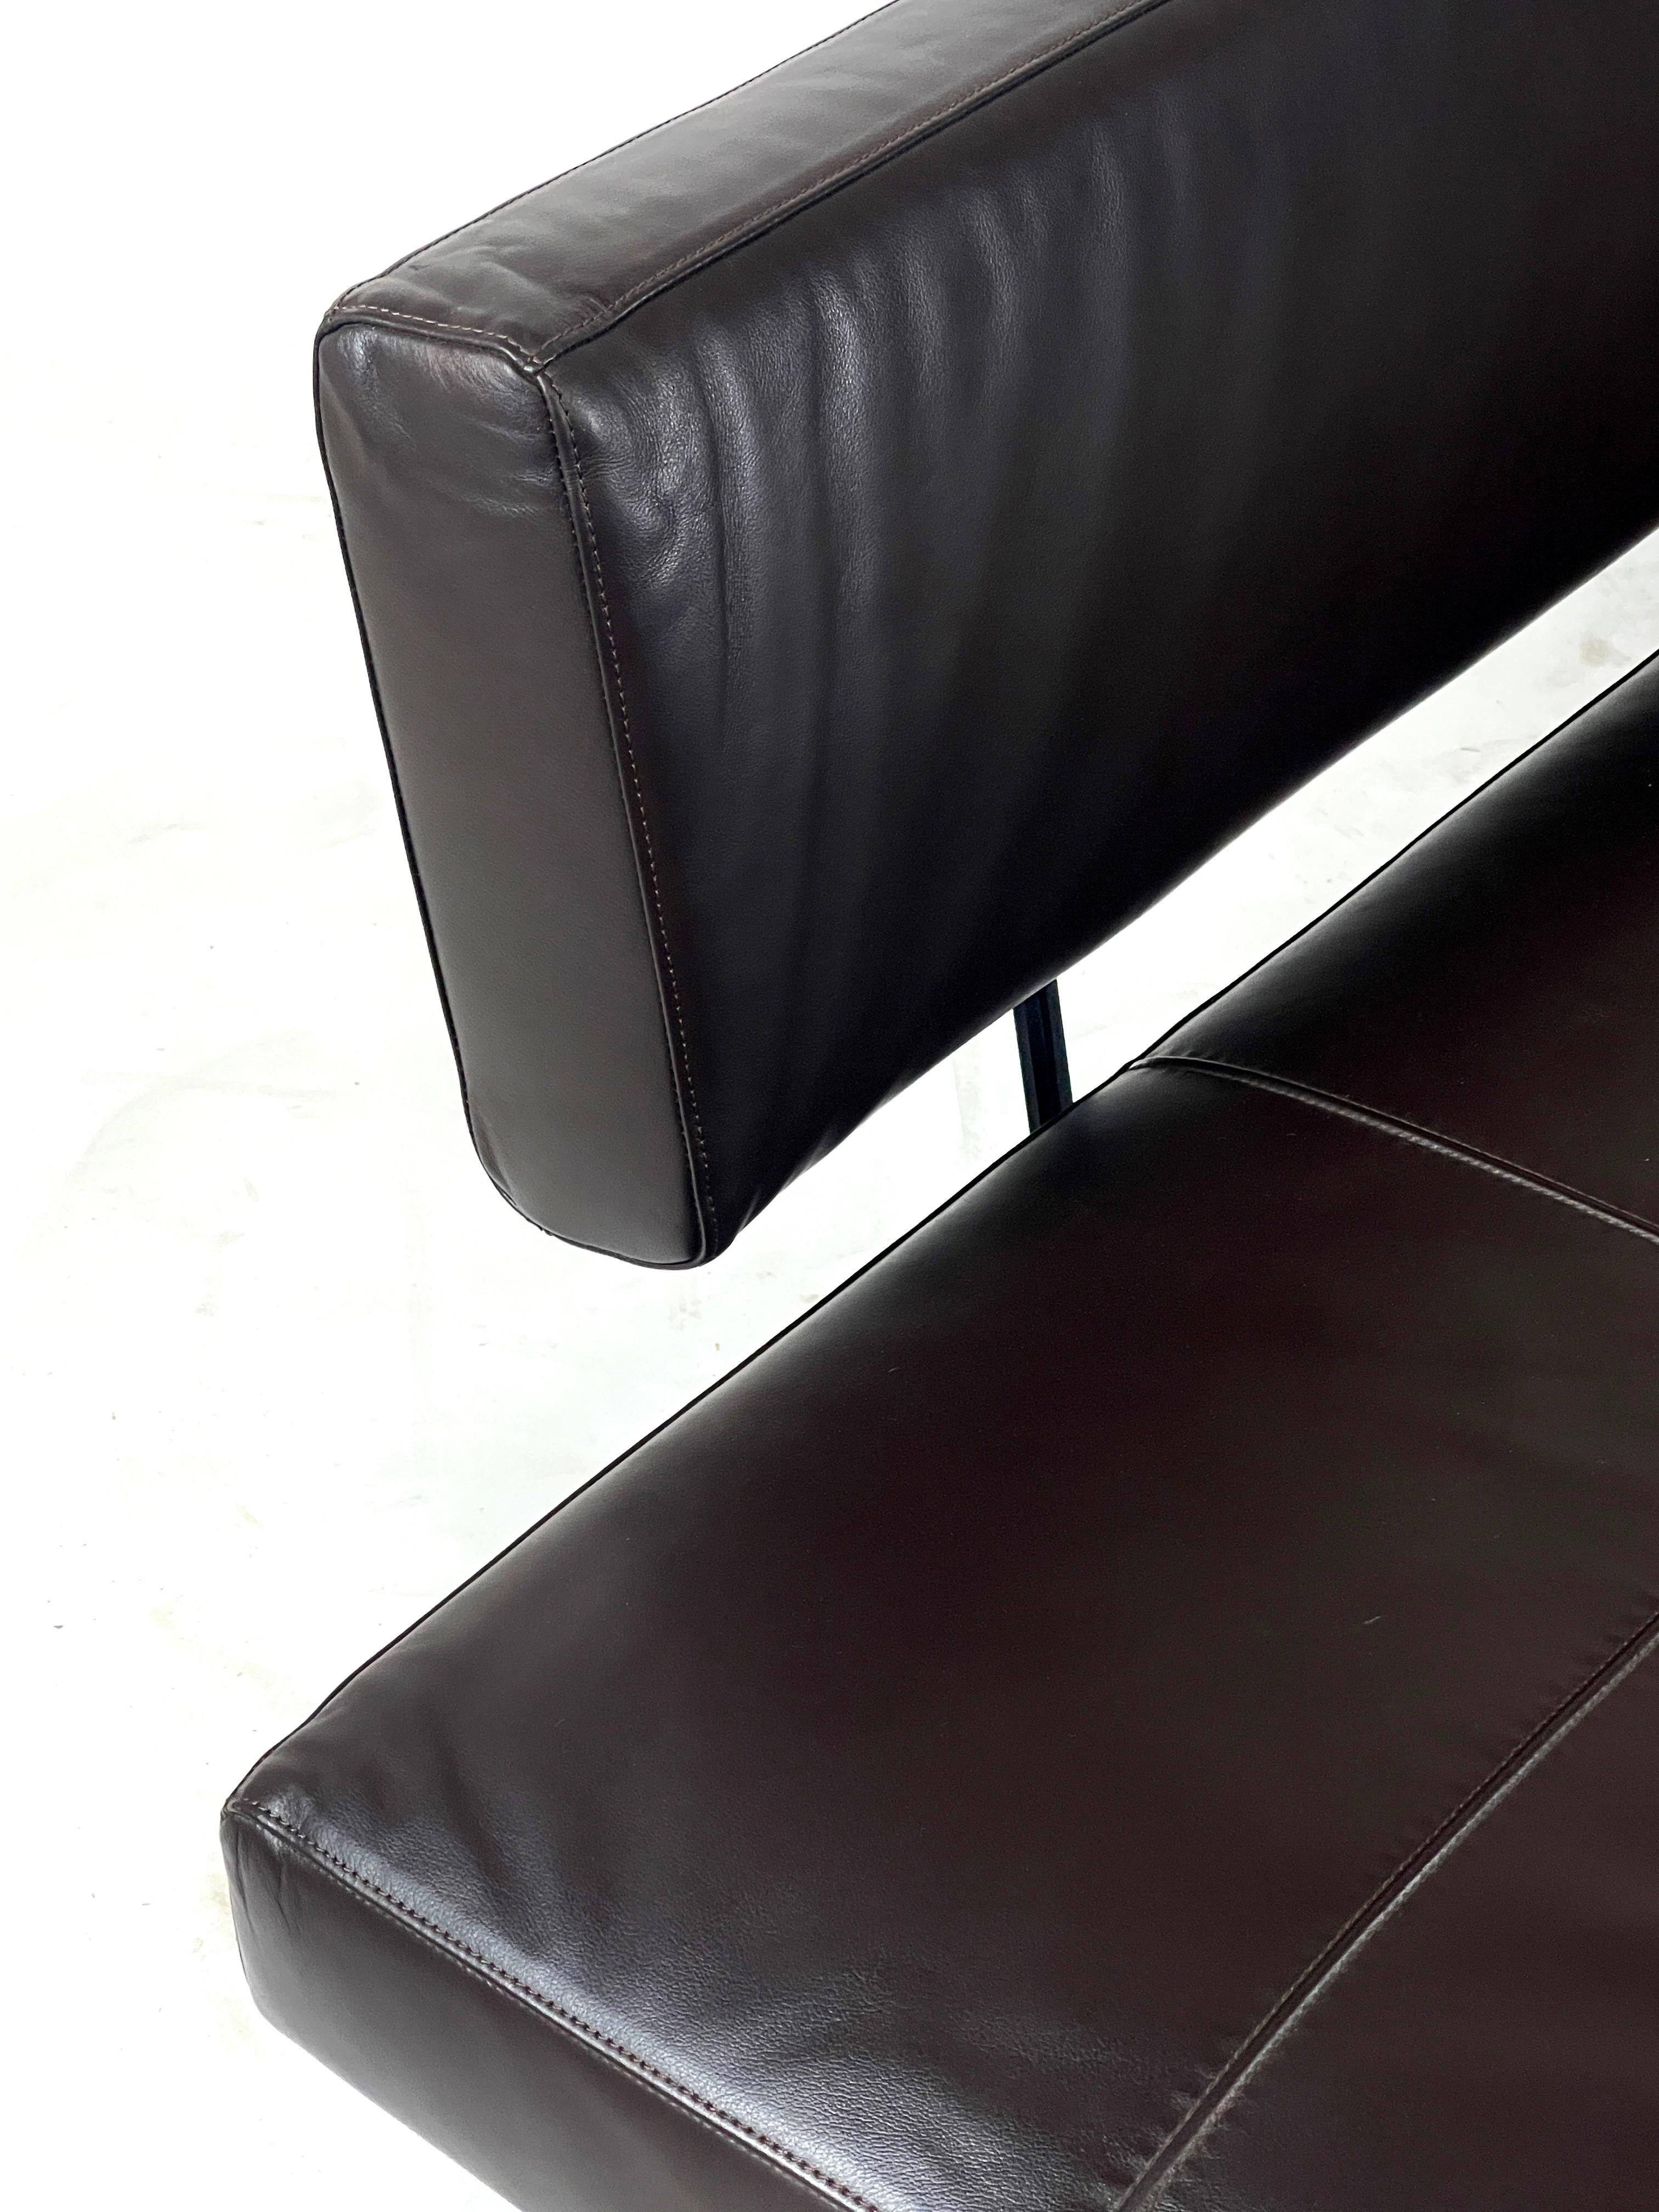 Walter Knoll Foster 510 sofa in a very deep brown leather. 
Foster 510 ? international design by the renowned architect and Pritzker prize winner Norman Foster. Minimum form, maximum comfort. Discreet stability is provided by the minimalist legs.